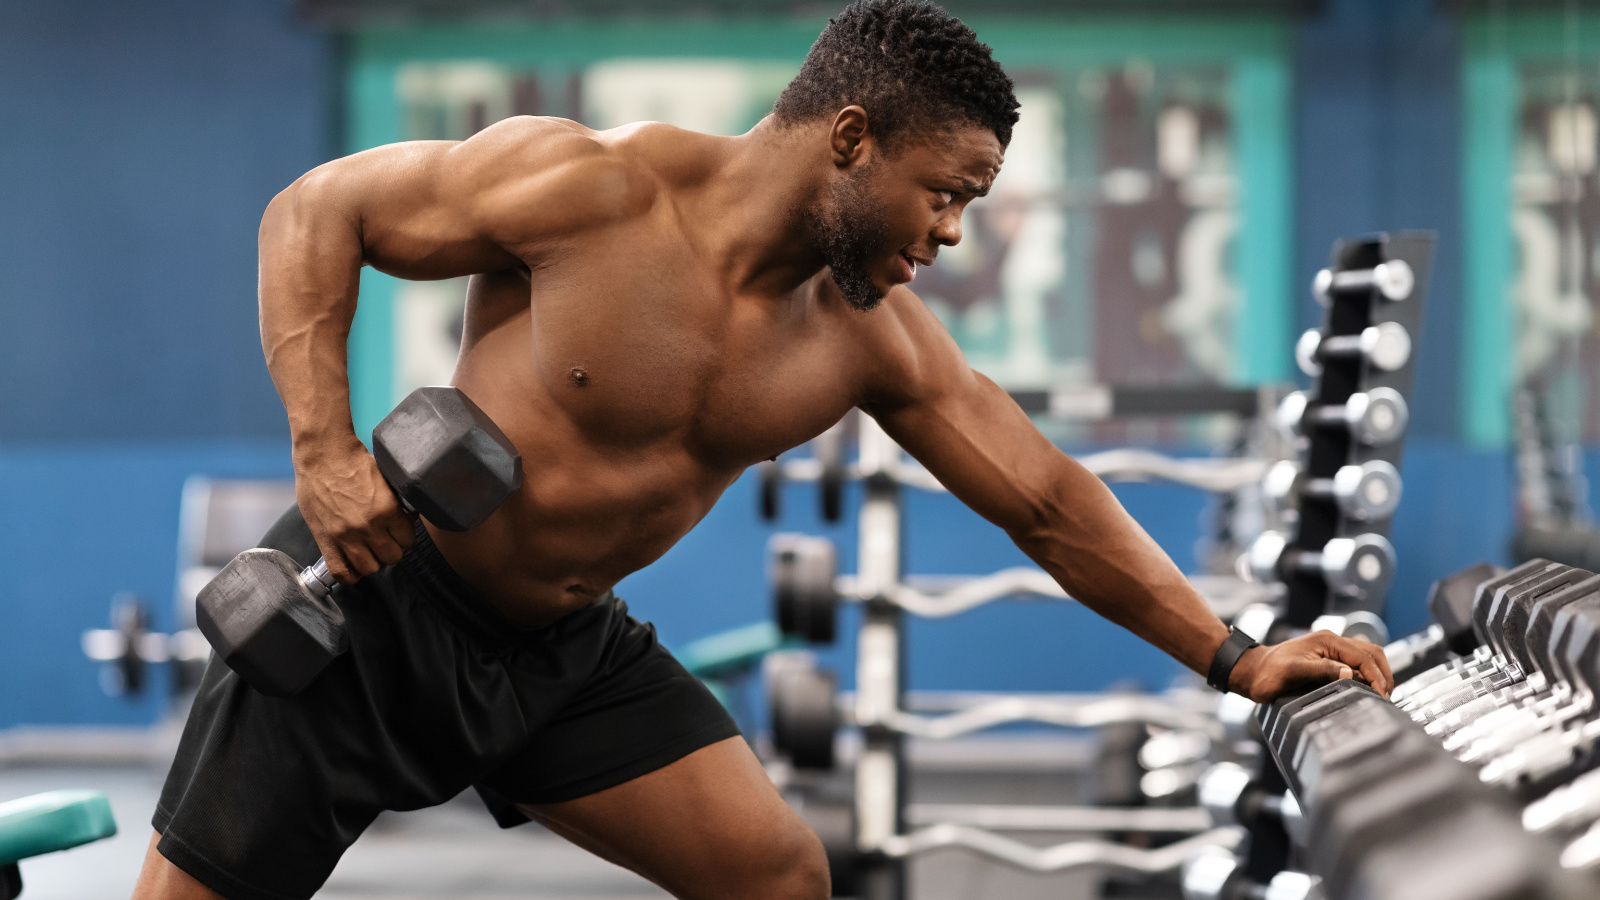 The Beginner's Guide to Natural Bodybuilding